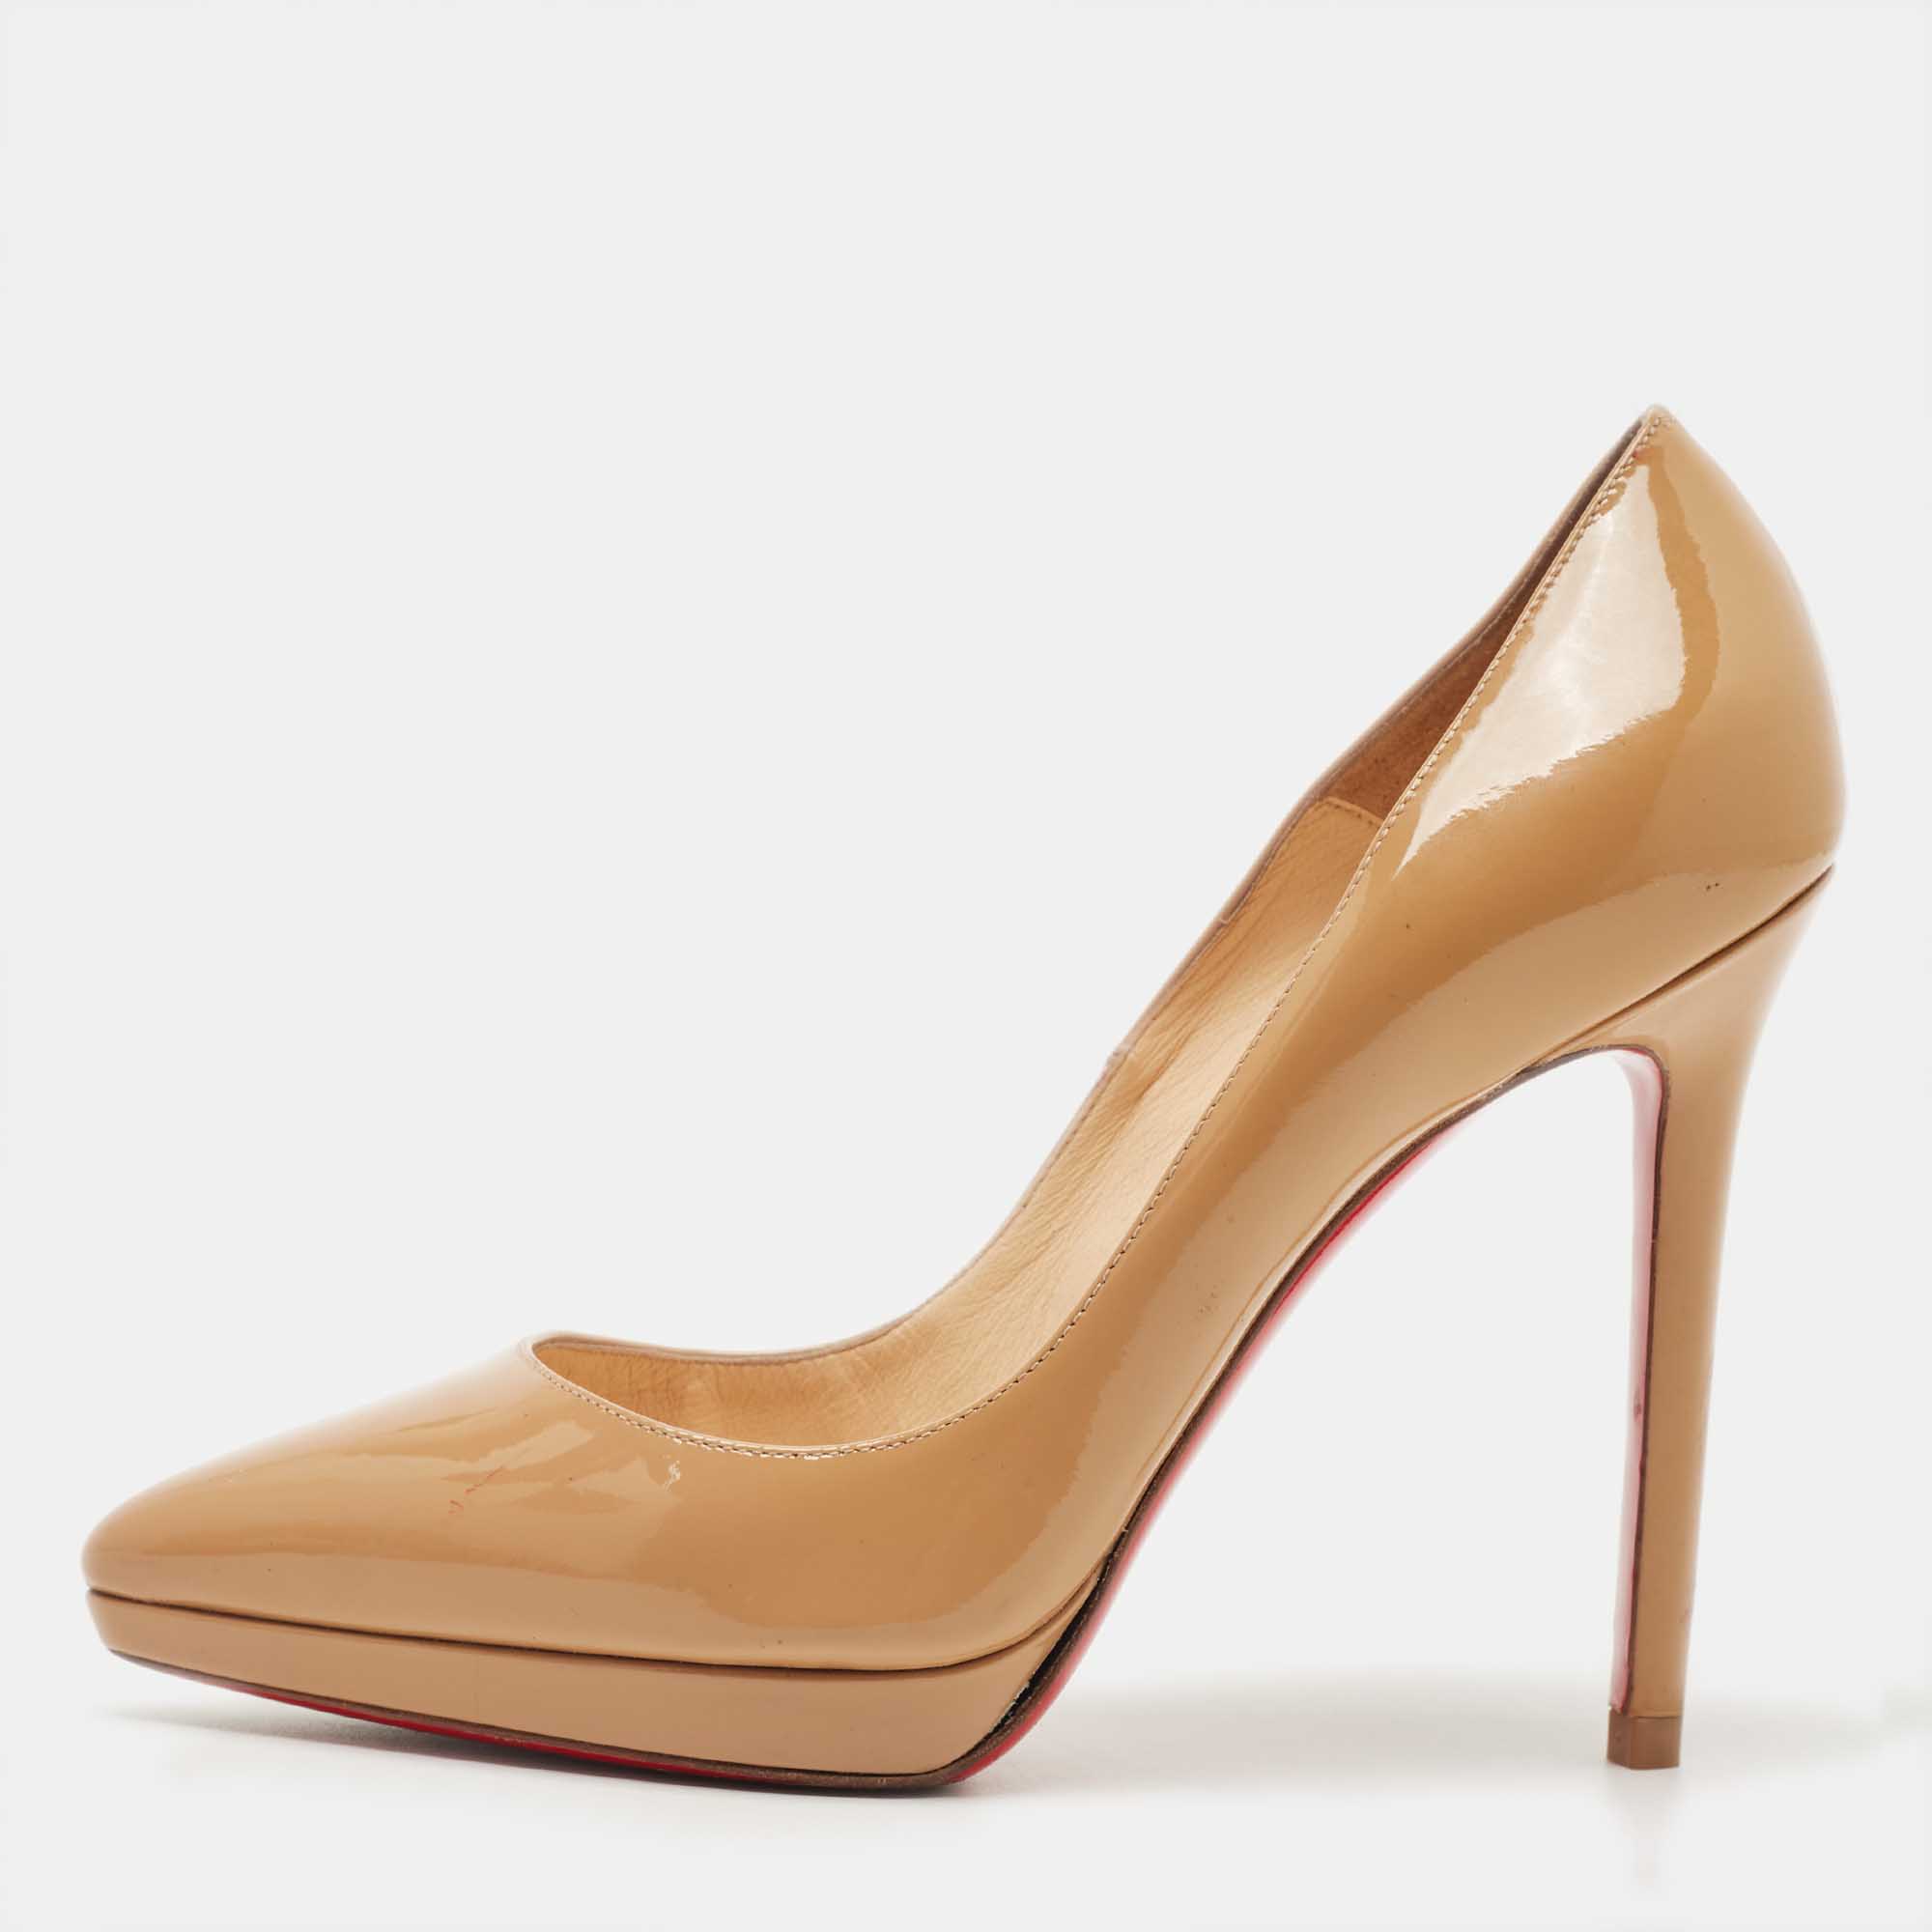 Pre-owned Christian Louboutin Beige Patent Pigalle Pumps Size 37.5